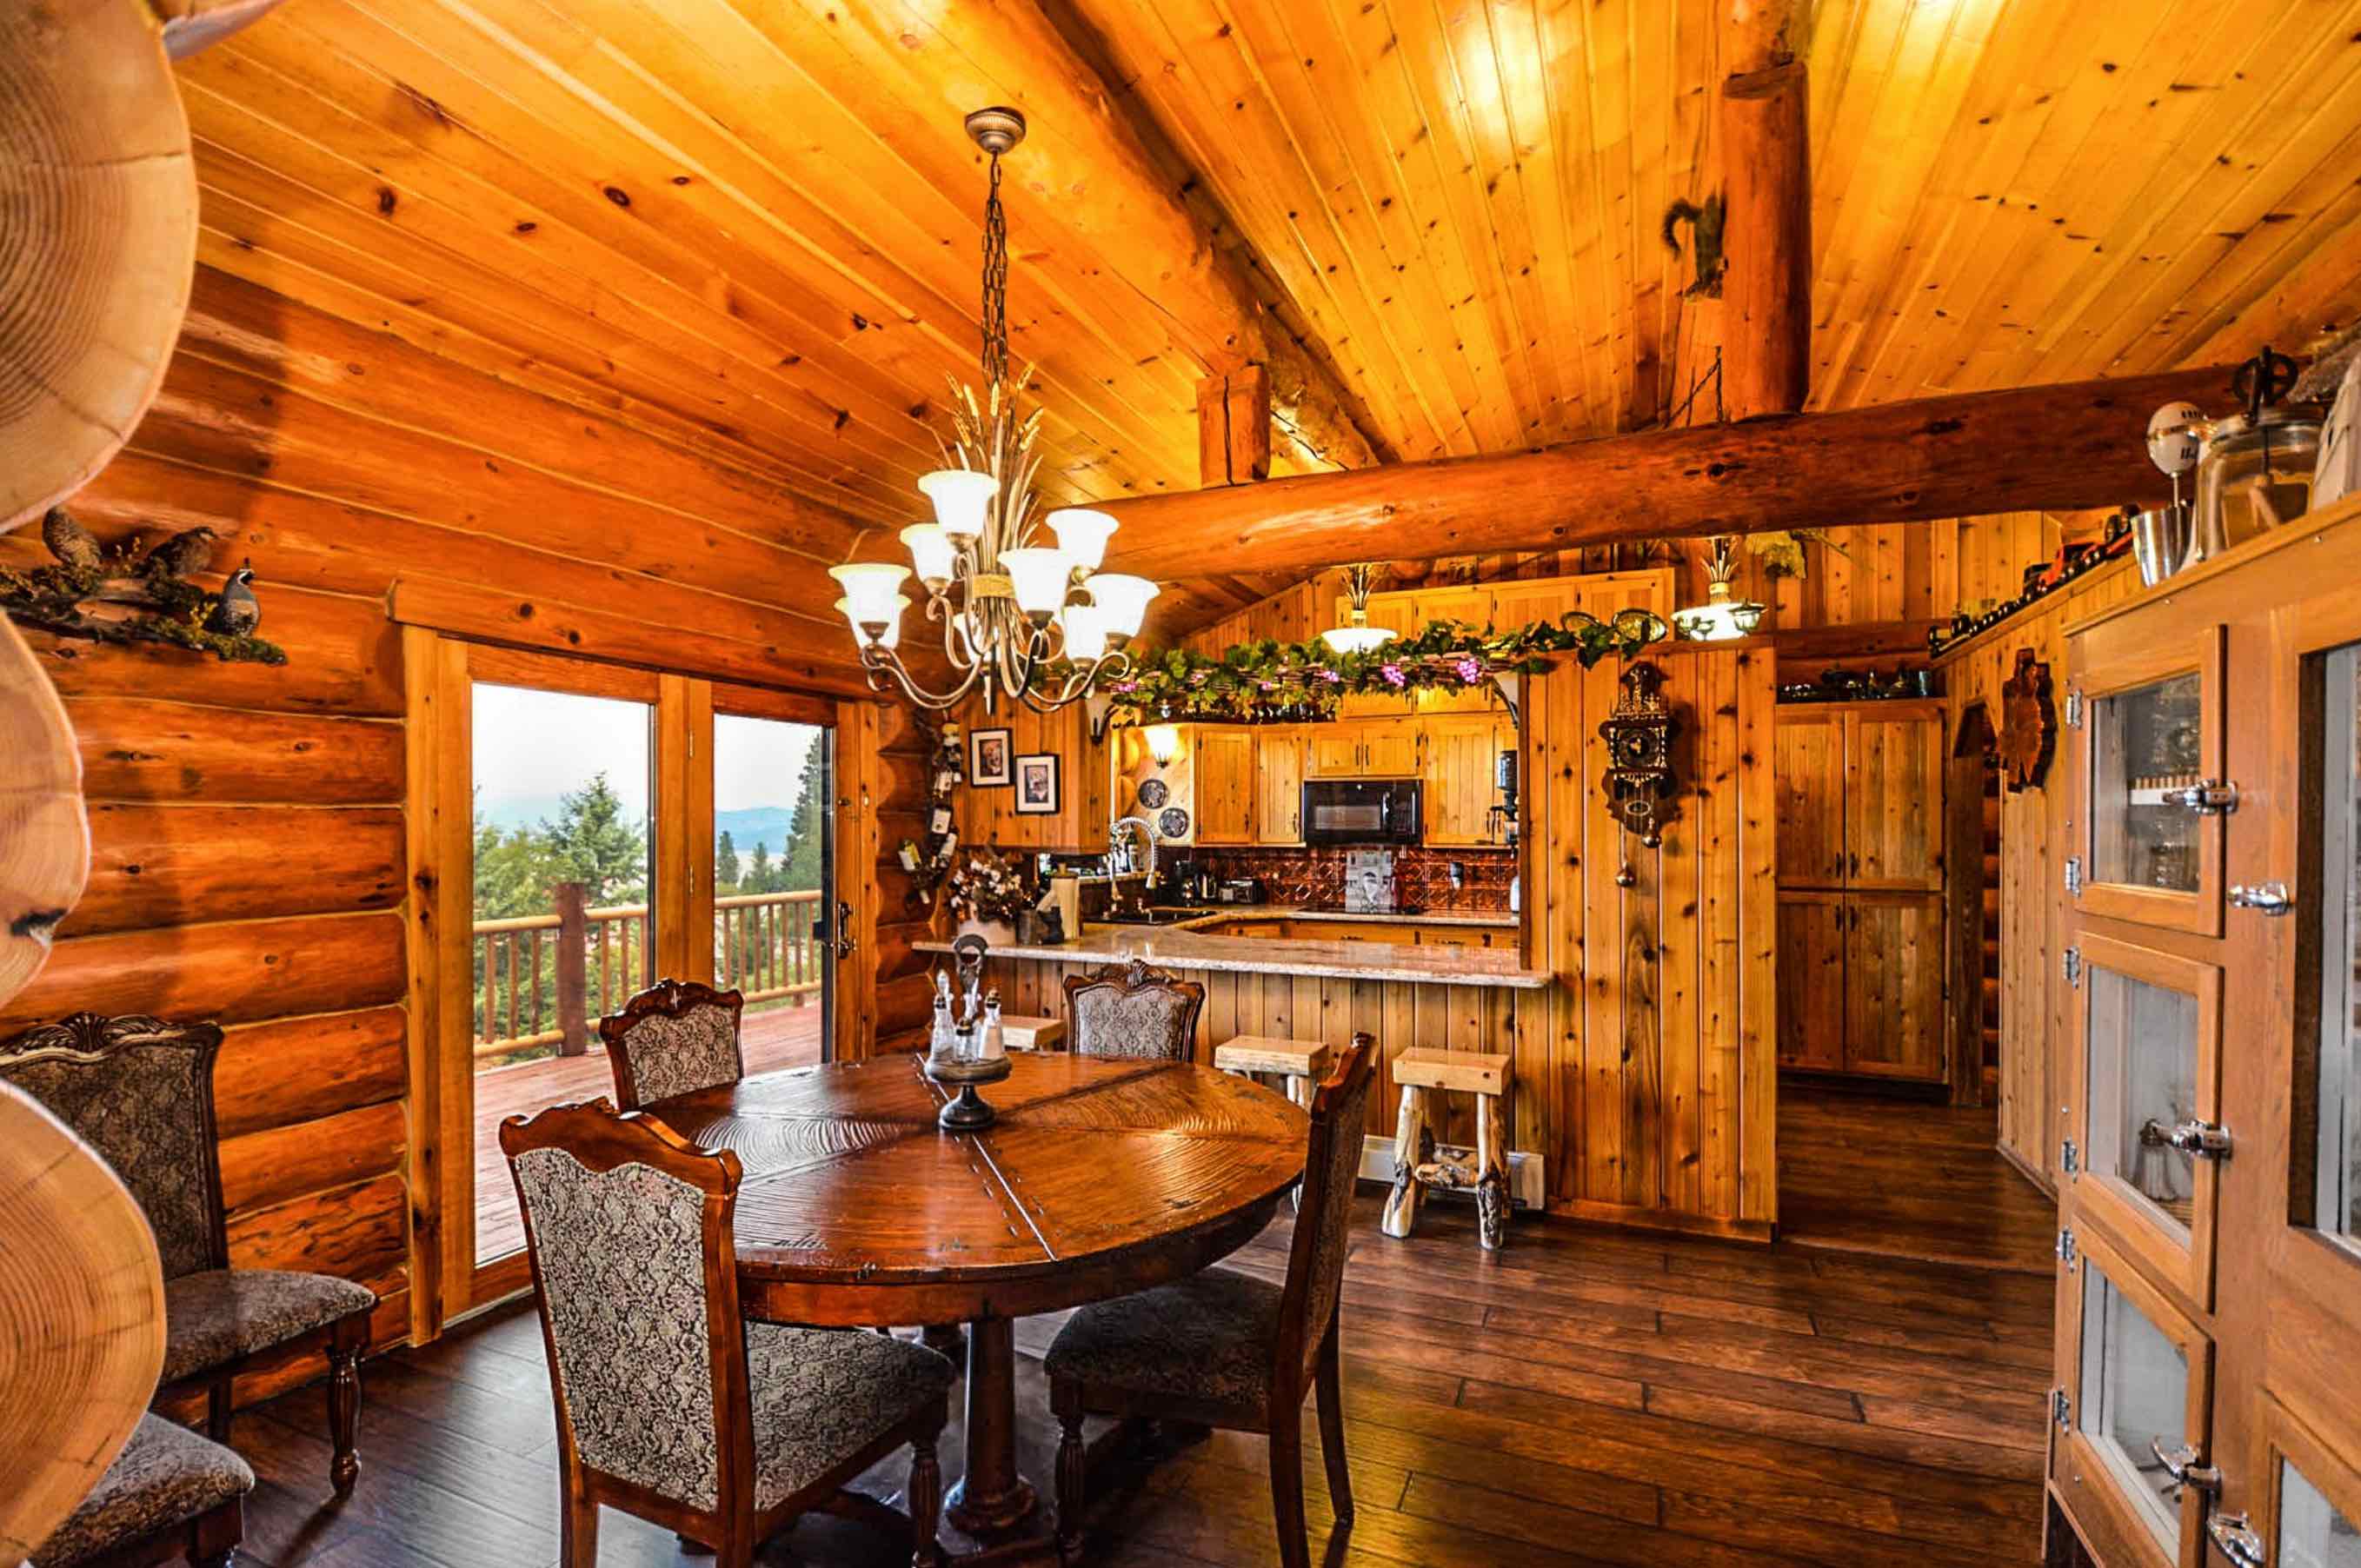 Rustic Style: Cozy Cabin Decor Ideas for Your Home